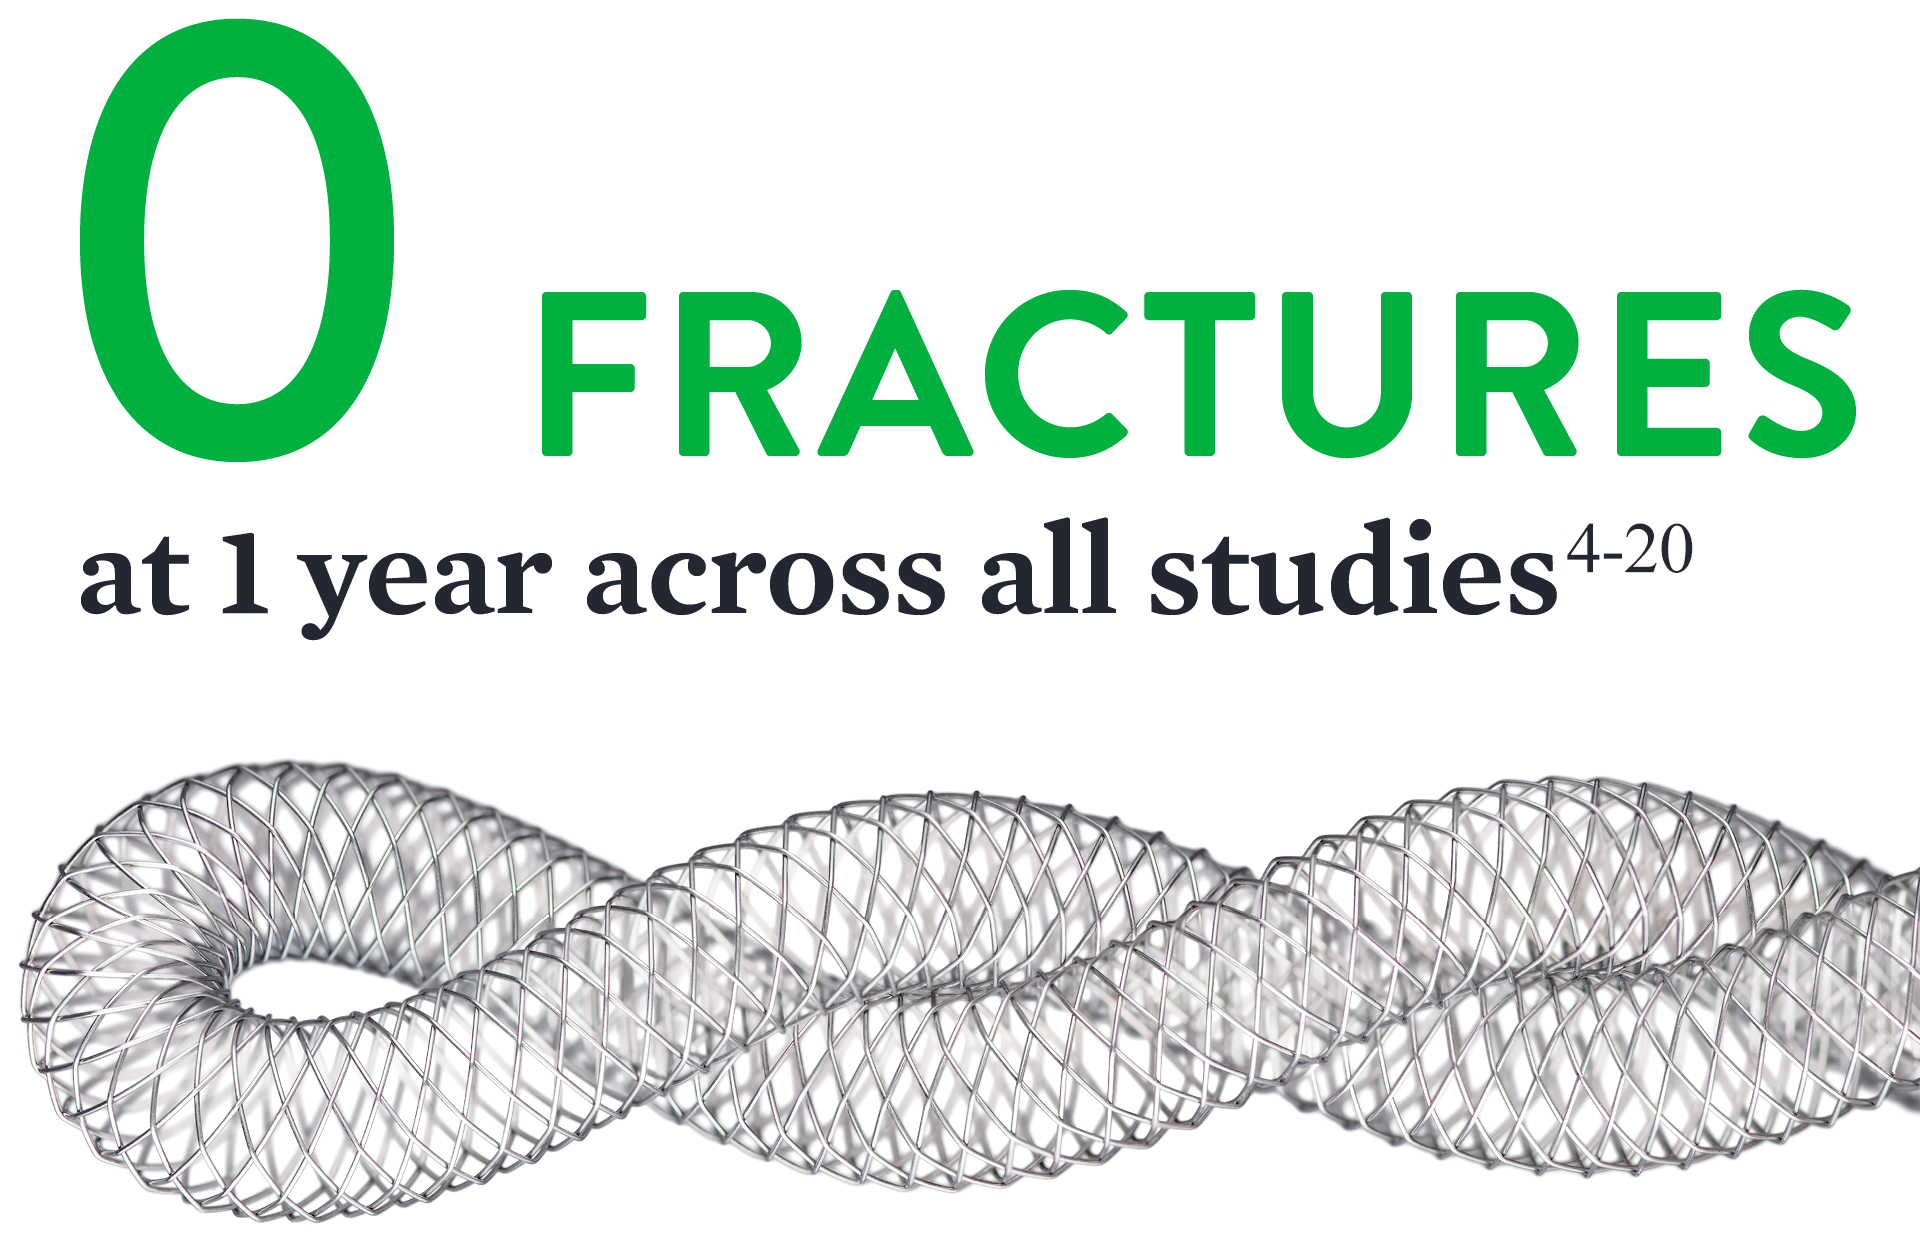 17 studies show 0 fractures at 1 year with Supera™ Stent